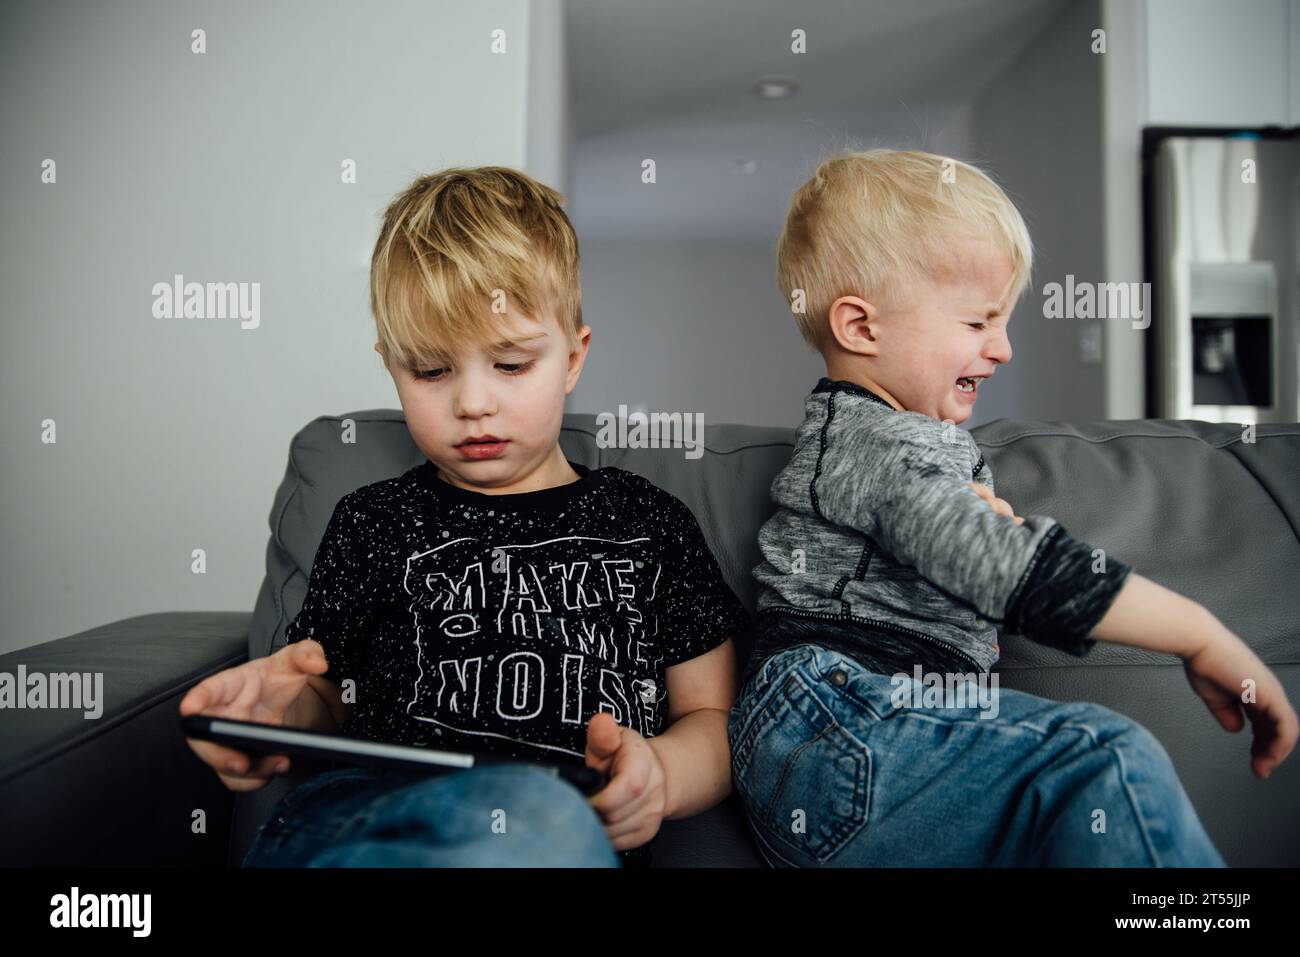 Two boys sit on a couch while one holds an ipad and the other th Stock Photo